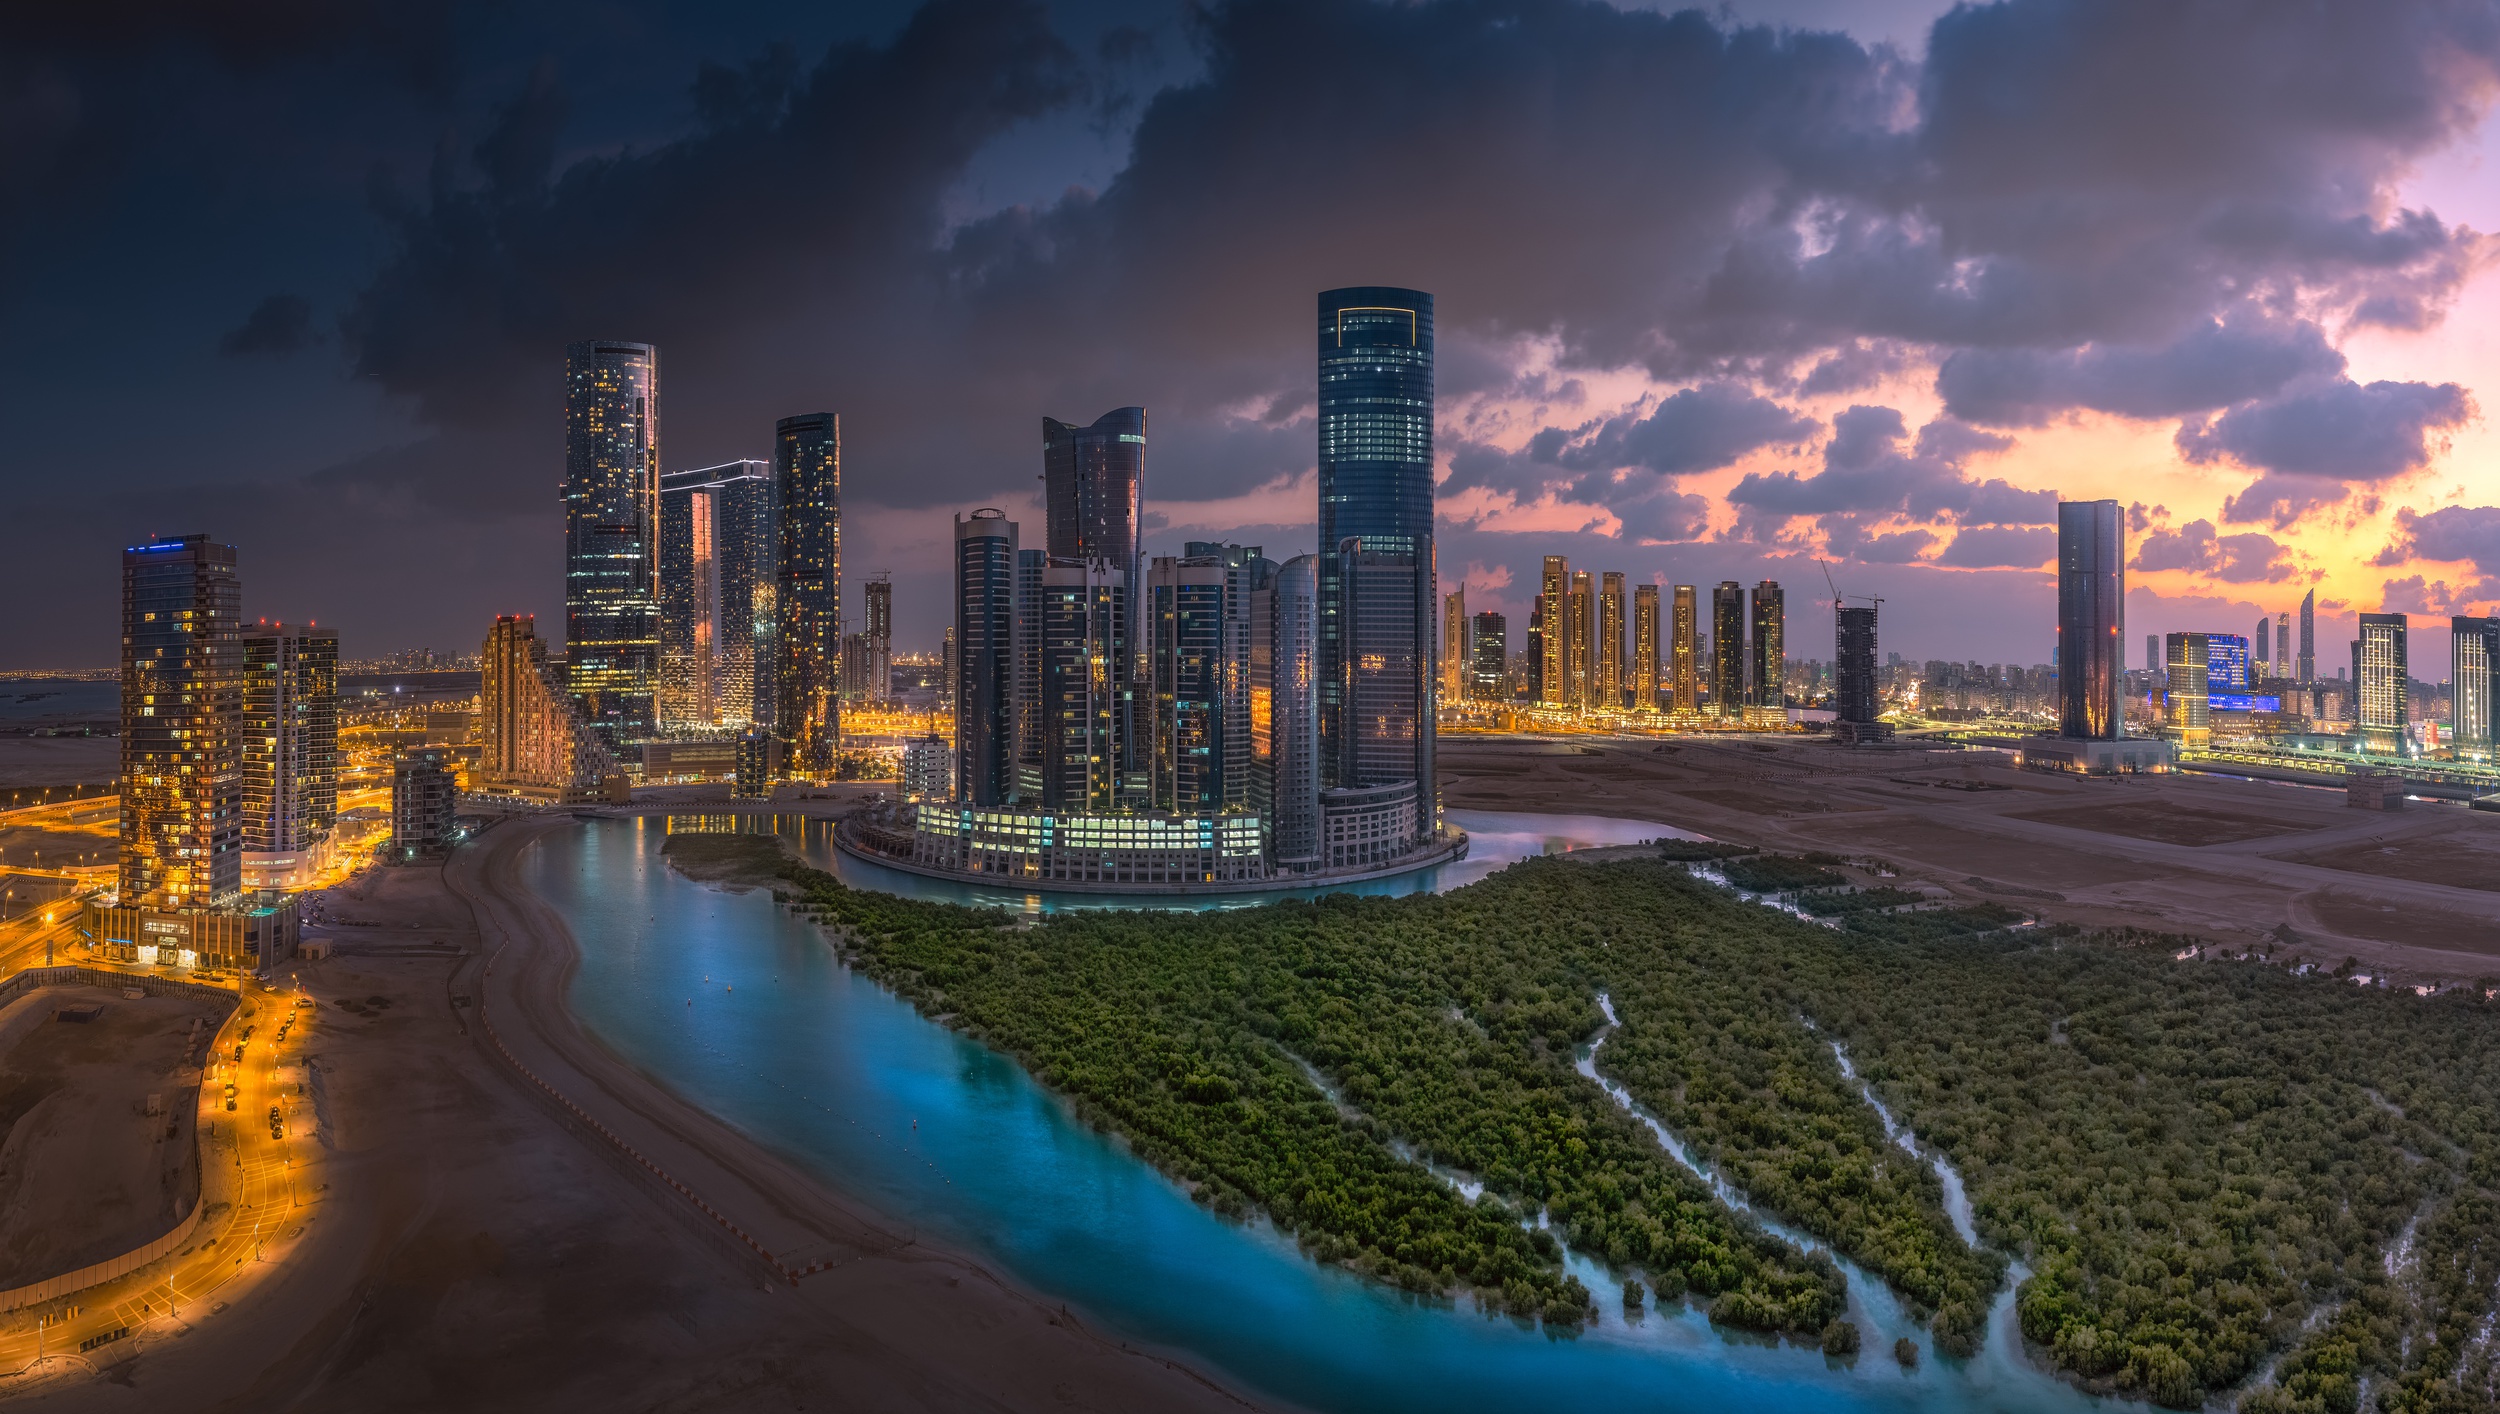 Abu Dhabi First City In Region To Complete aAssessment Of Ecosystems As Per IUCN’s Standards